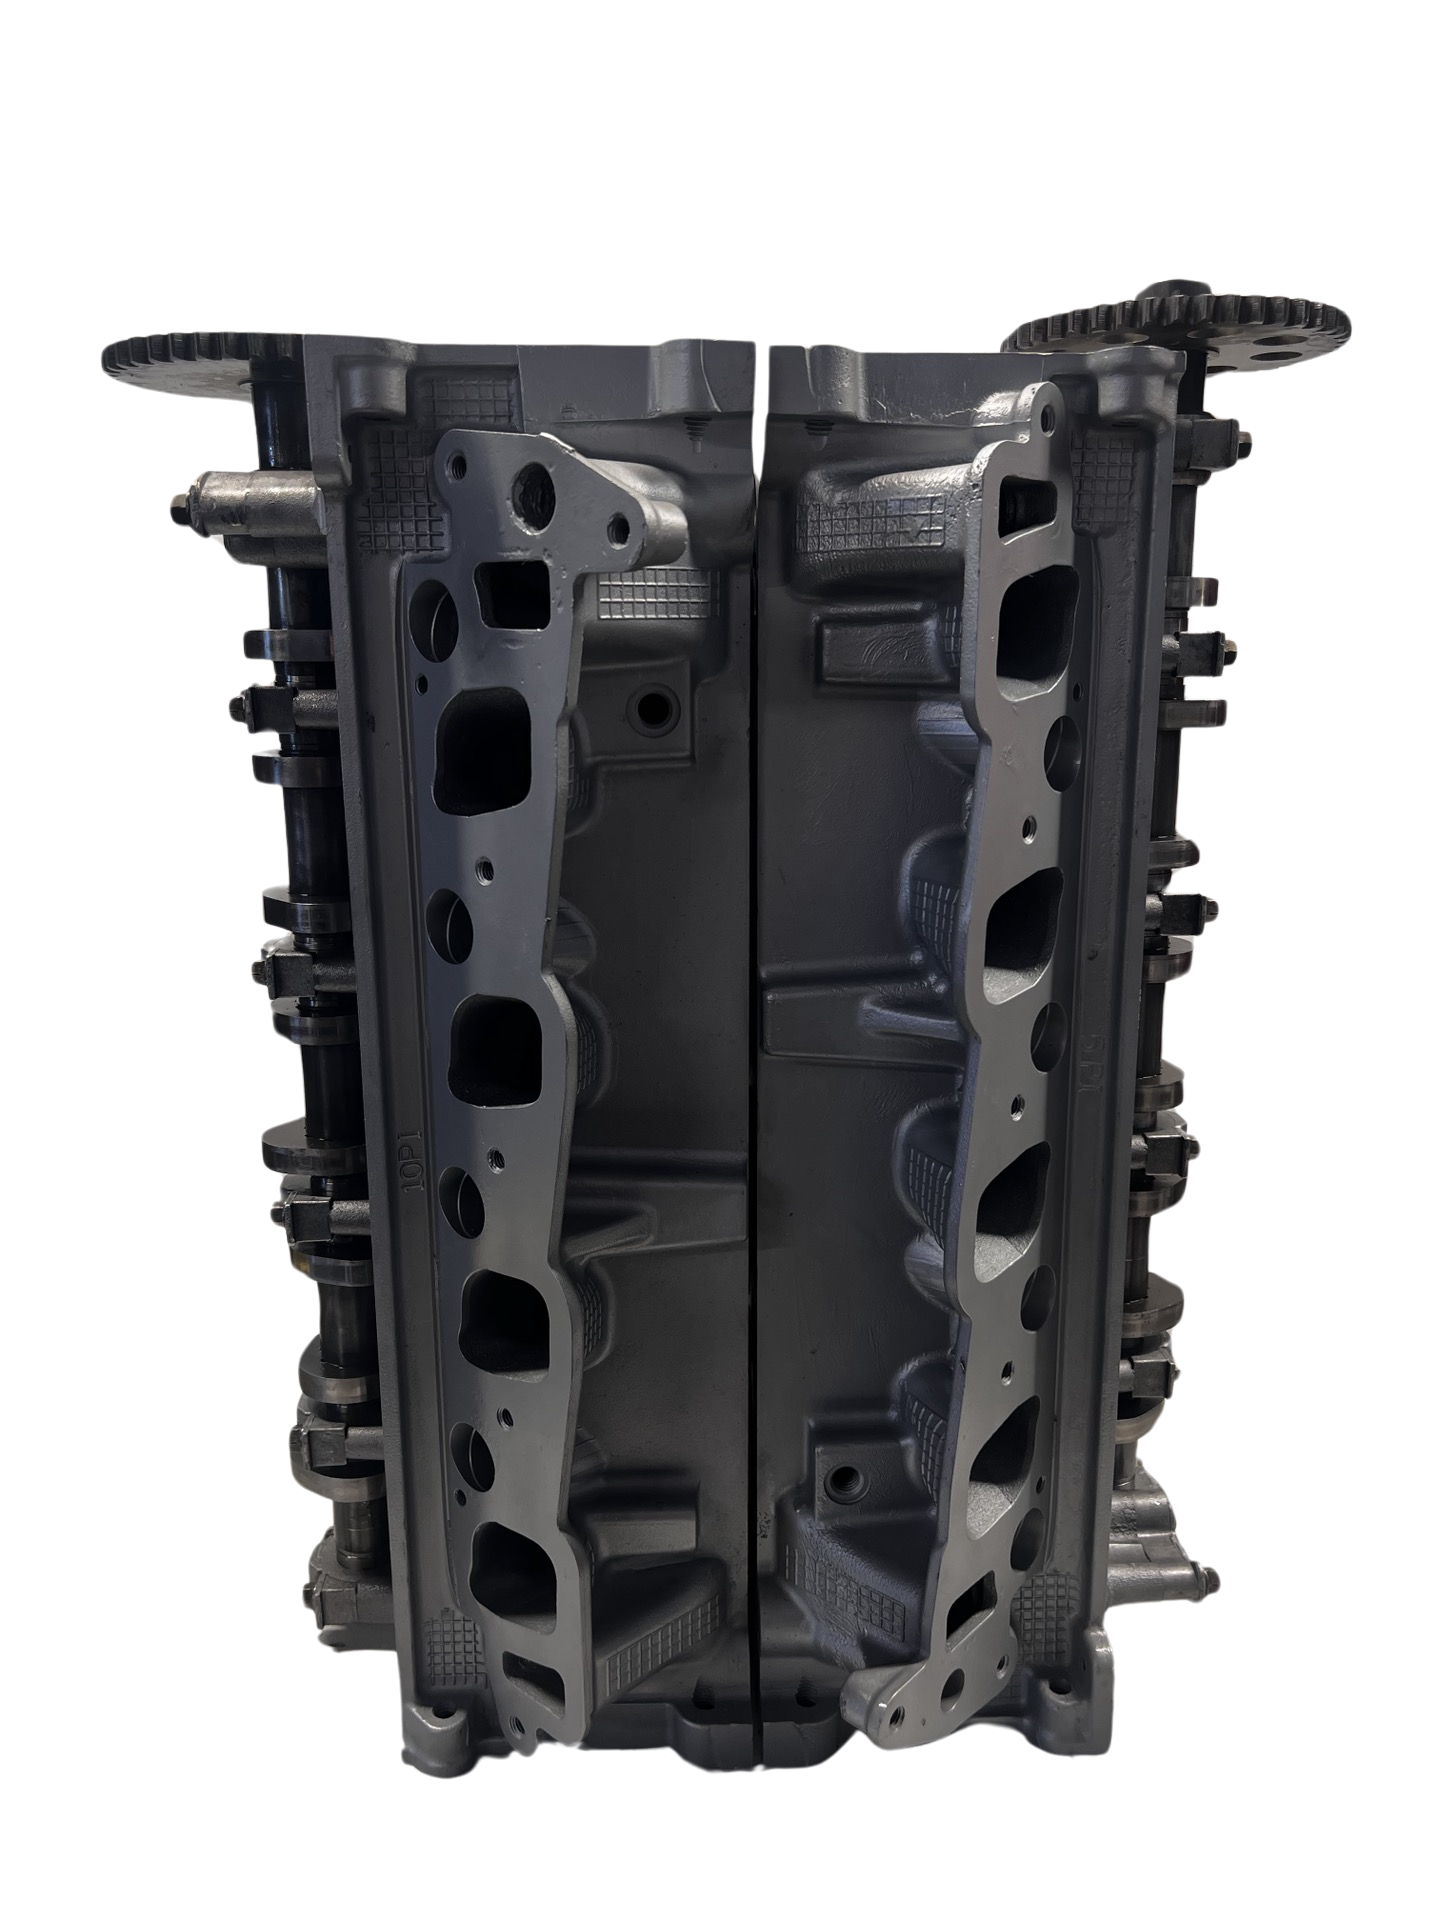 Exhaust side of cylinder heads for a Ford 5.4L Casting #XL3E (SOLD IN PAIR)